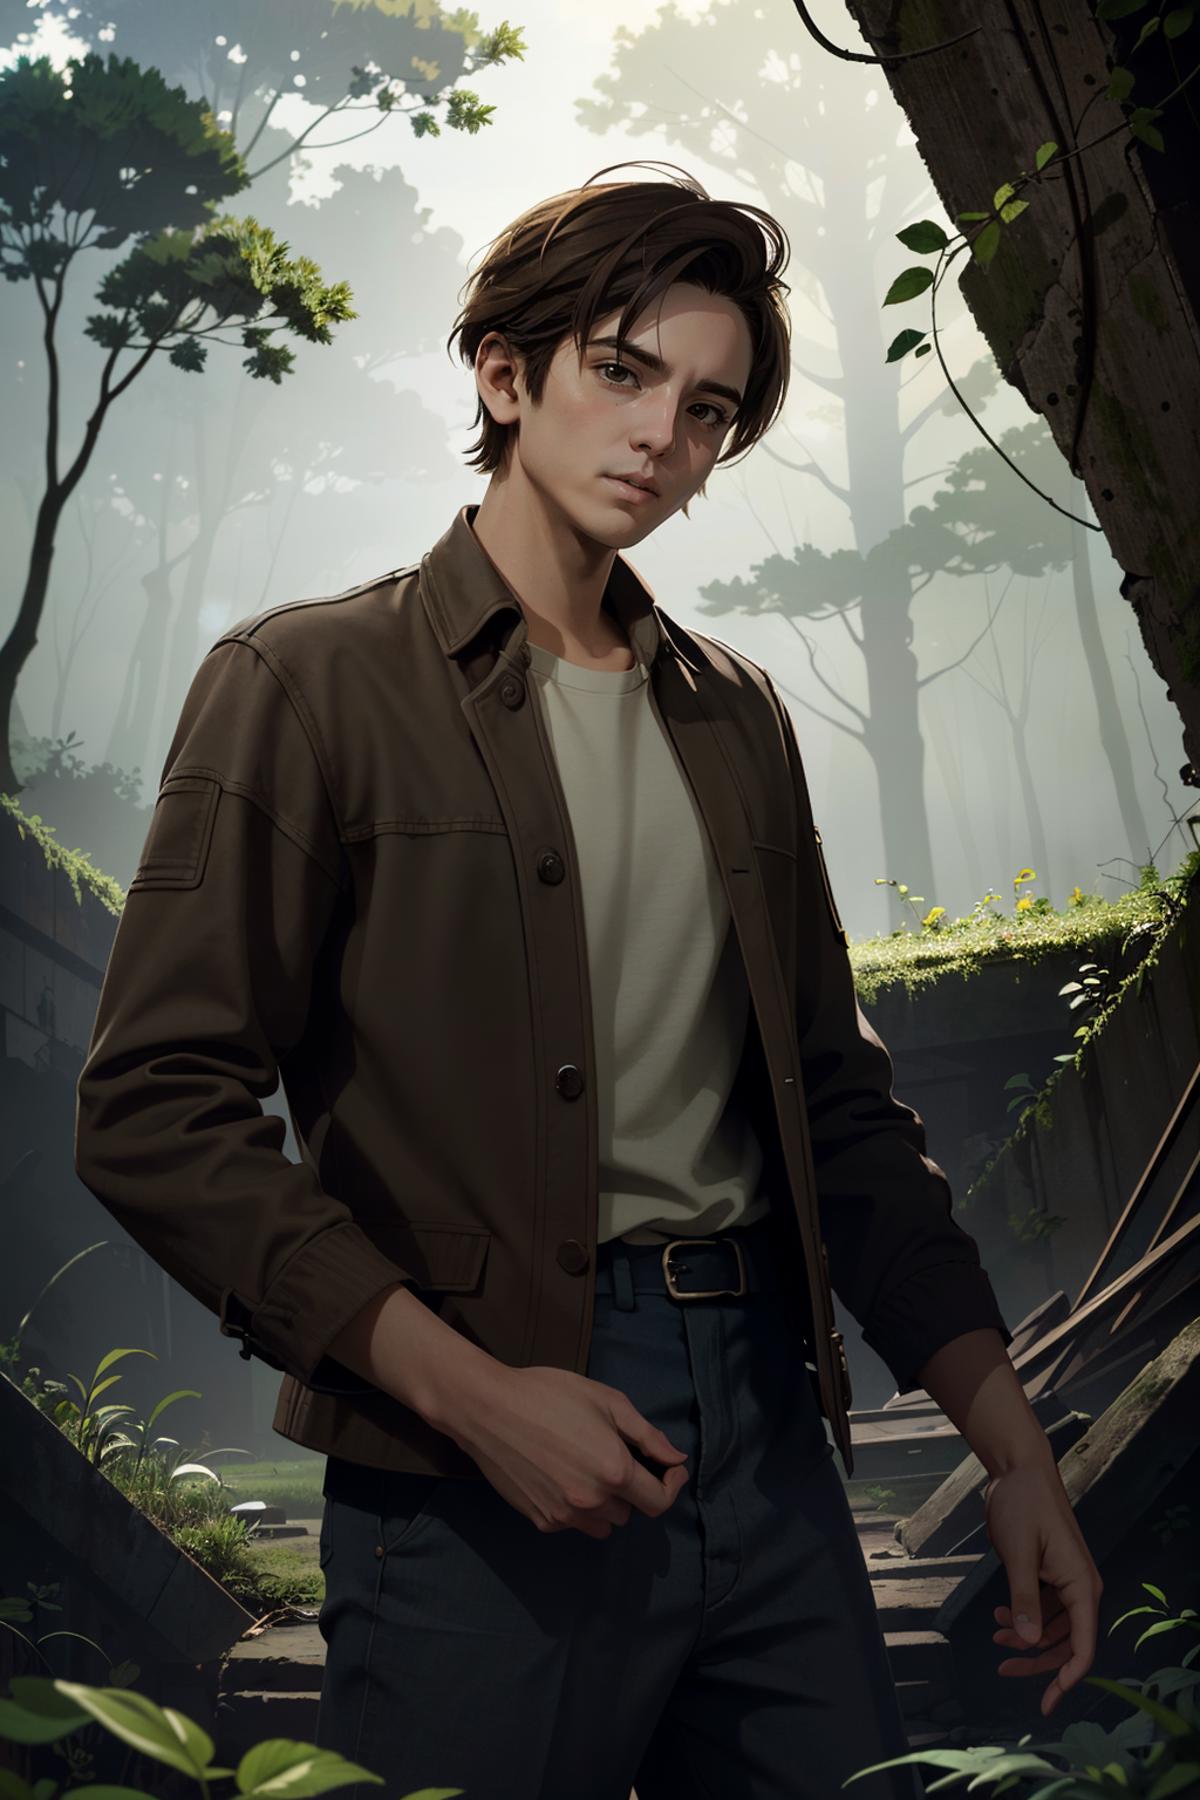 Dylan from The Quarry image by BloodRedKittie